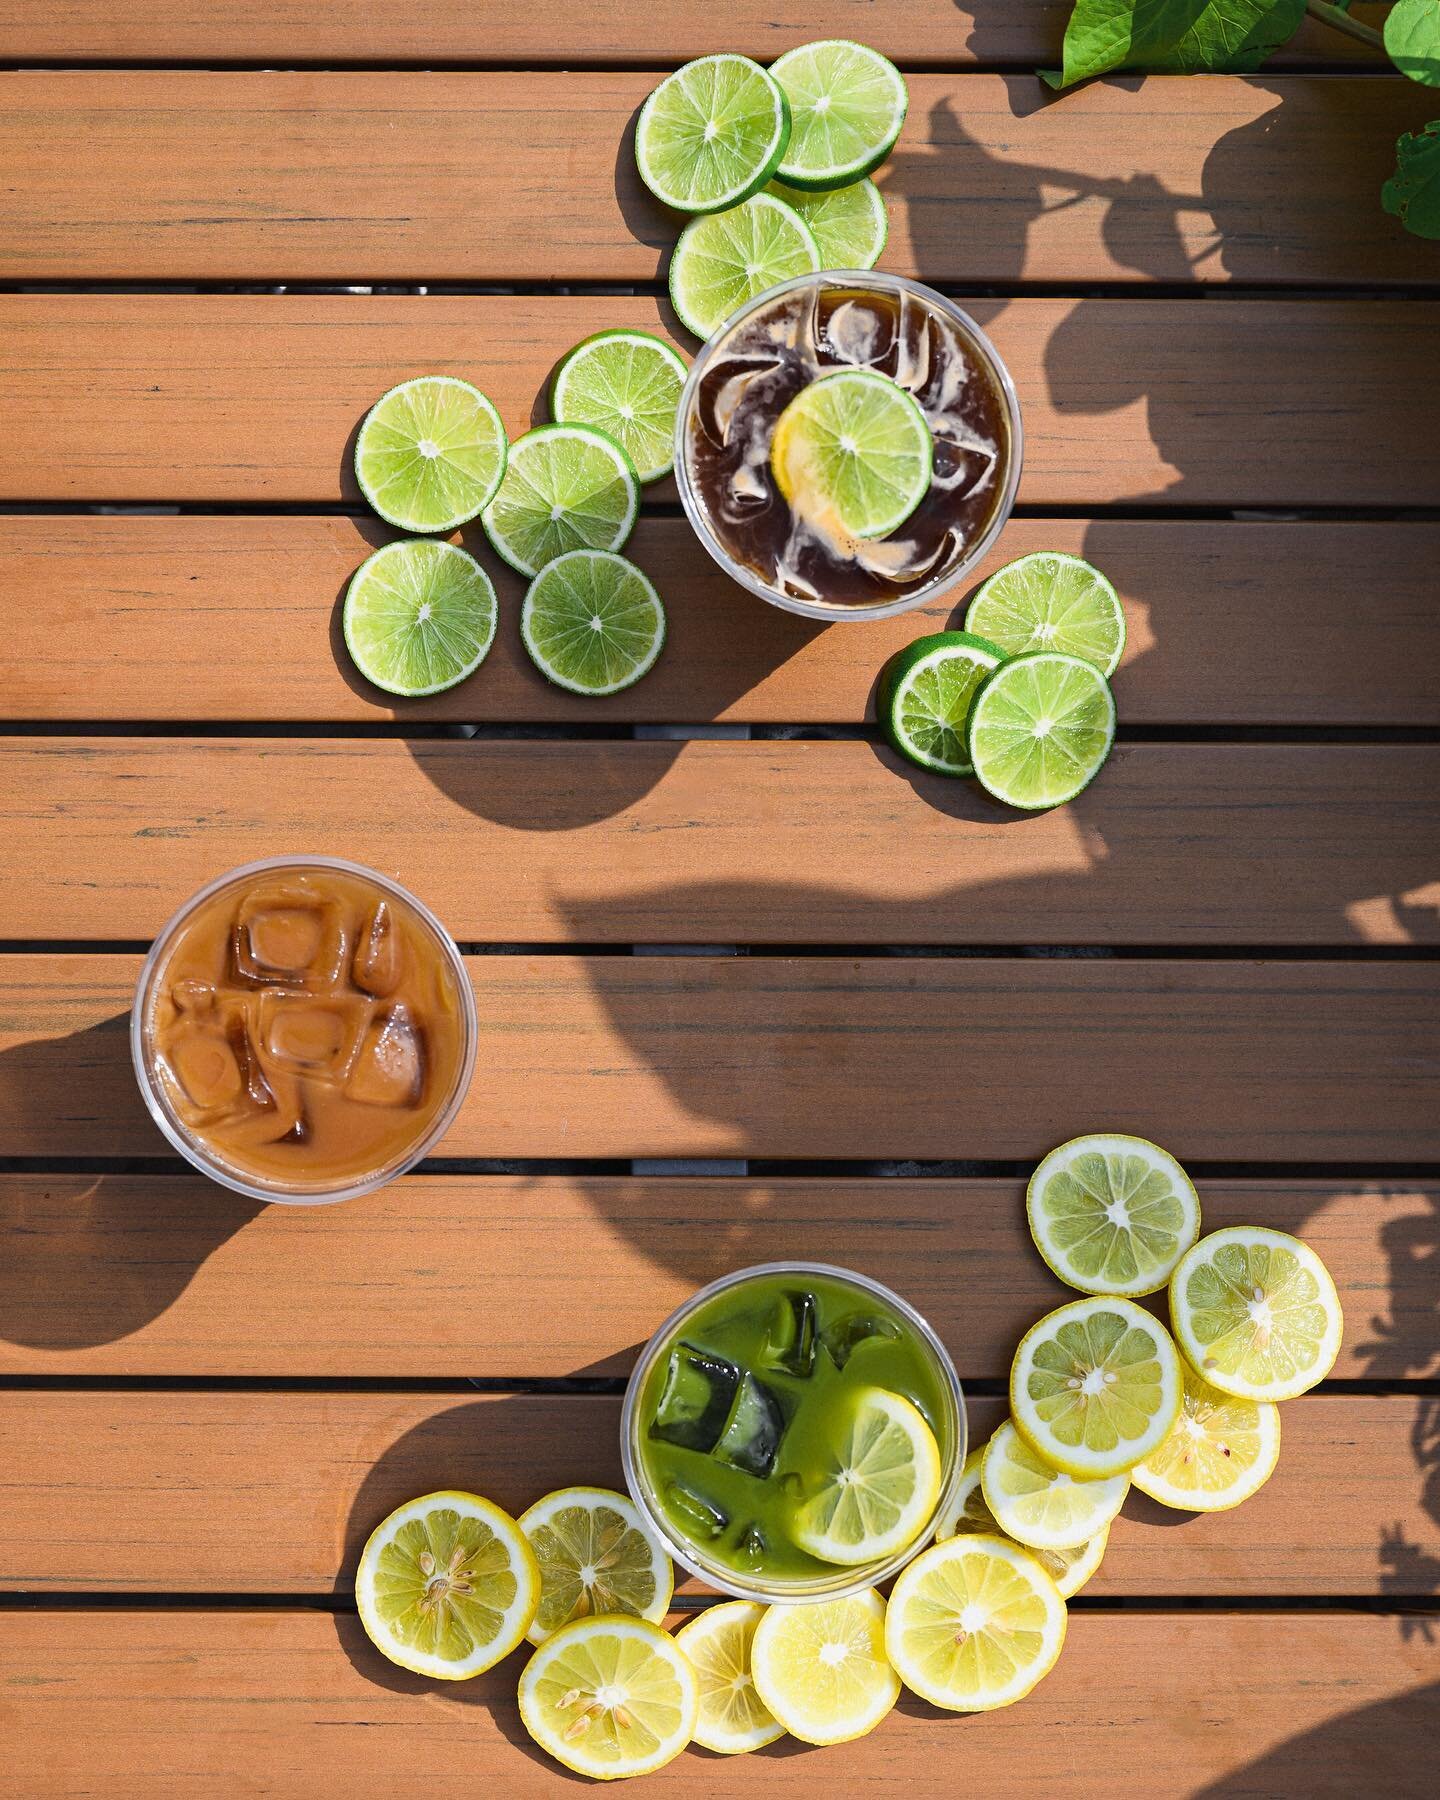 Check out our new Summer Menu at Sunrise! Change up your usual and explore one of our fun, refreshing drinks! 

-Matcha Lemonade
-Don&rsquo;t Chai Worry (cold brew &amp; chai)
-Sunrise Palmer (raspberry sunrise tea &amp; fresh lemonade)
-Mexican Espr